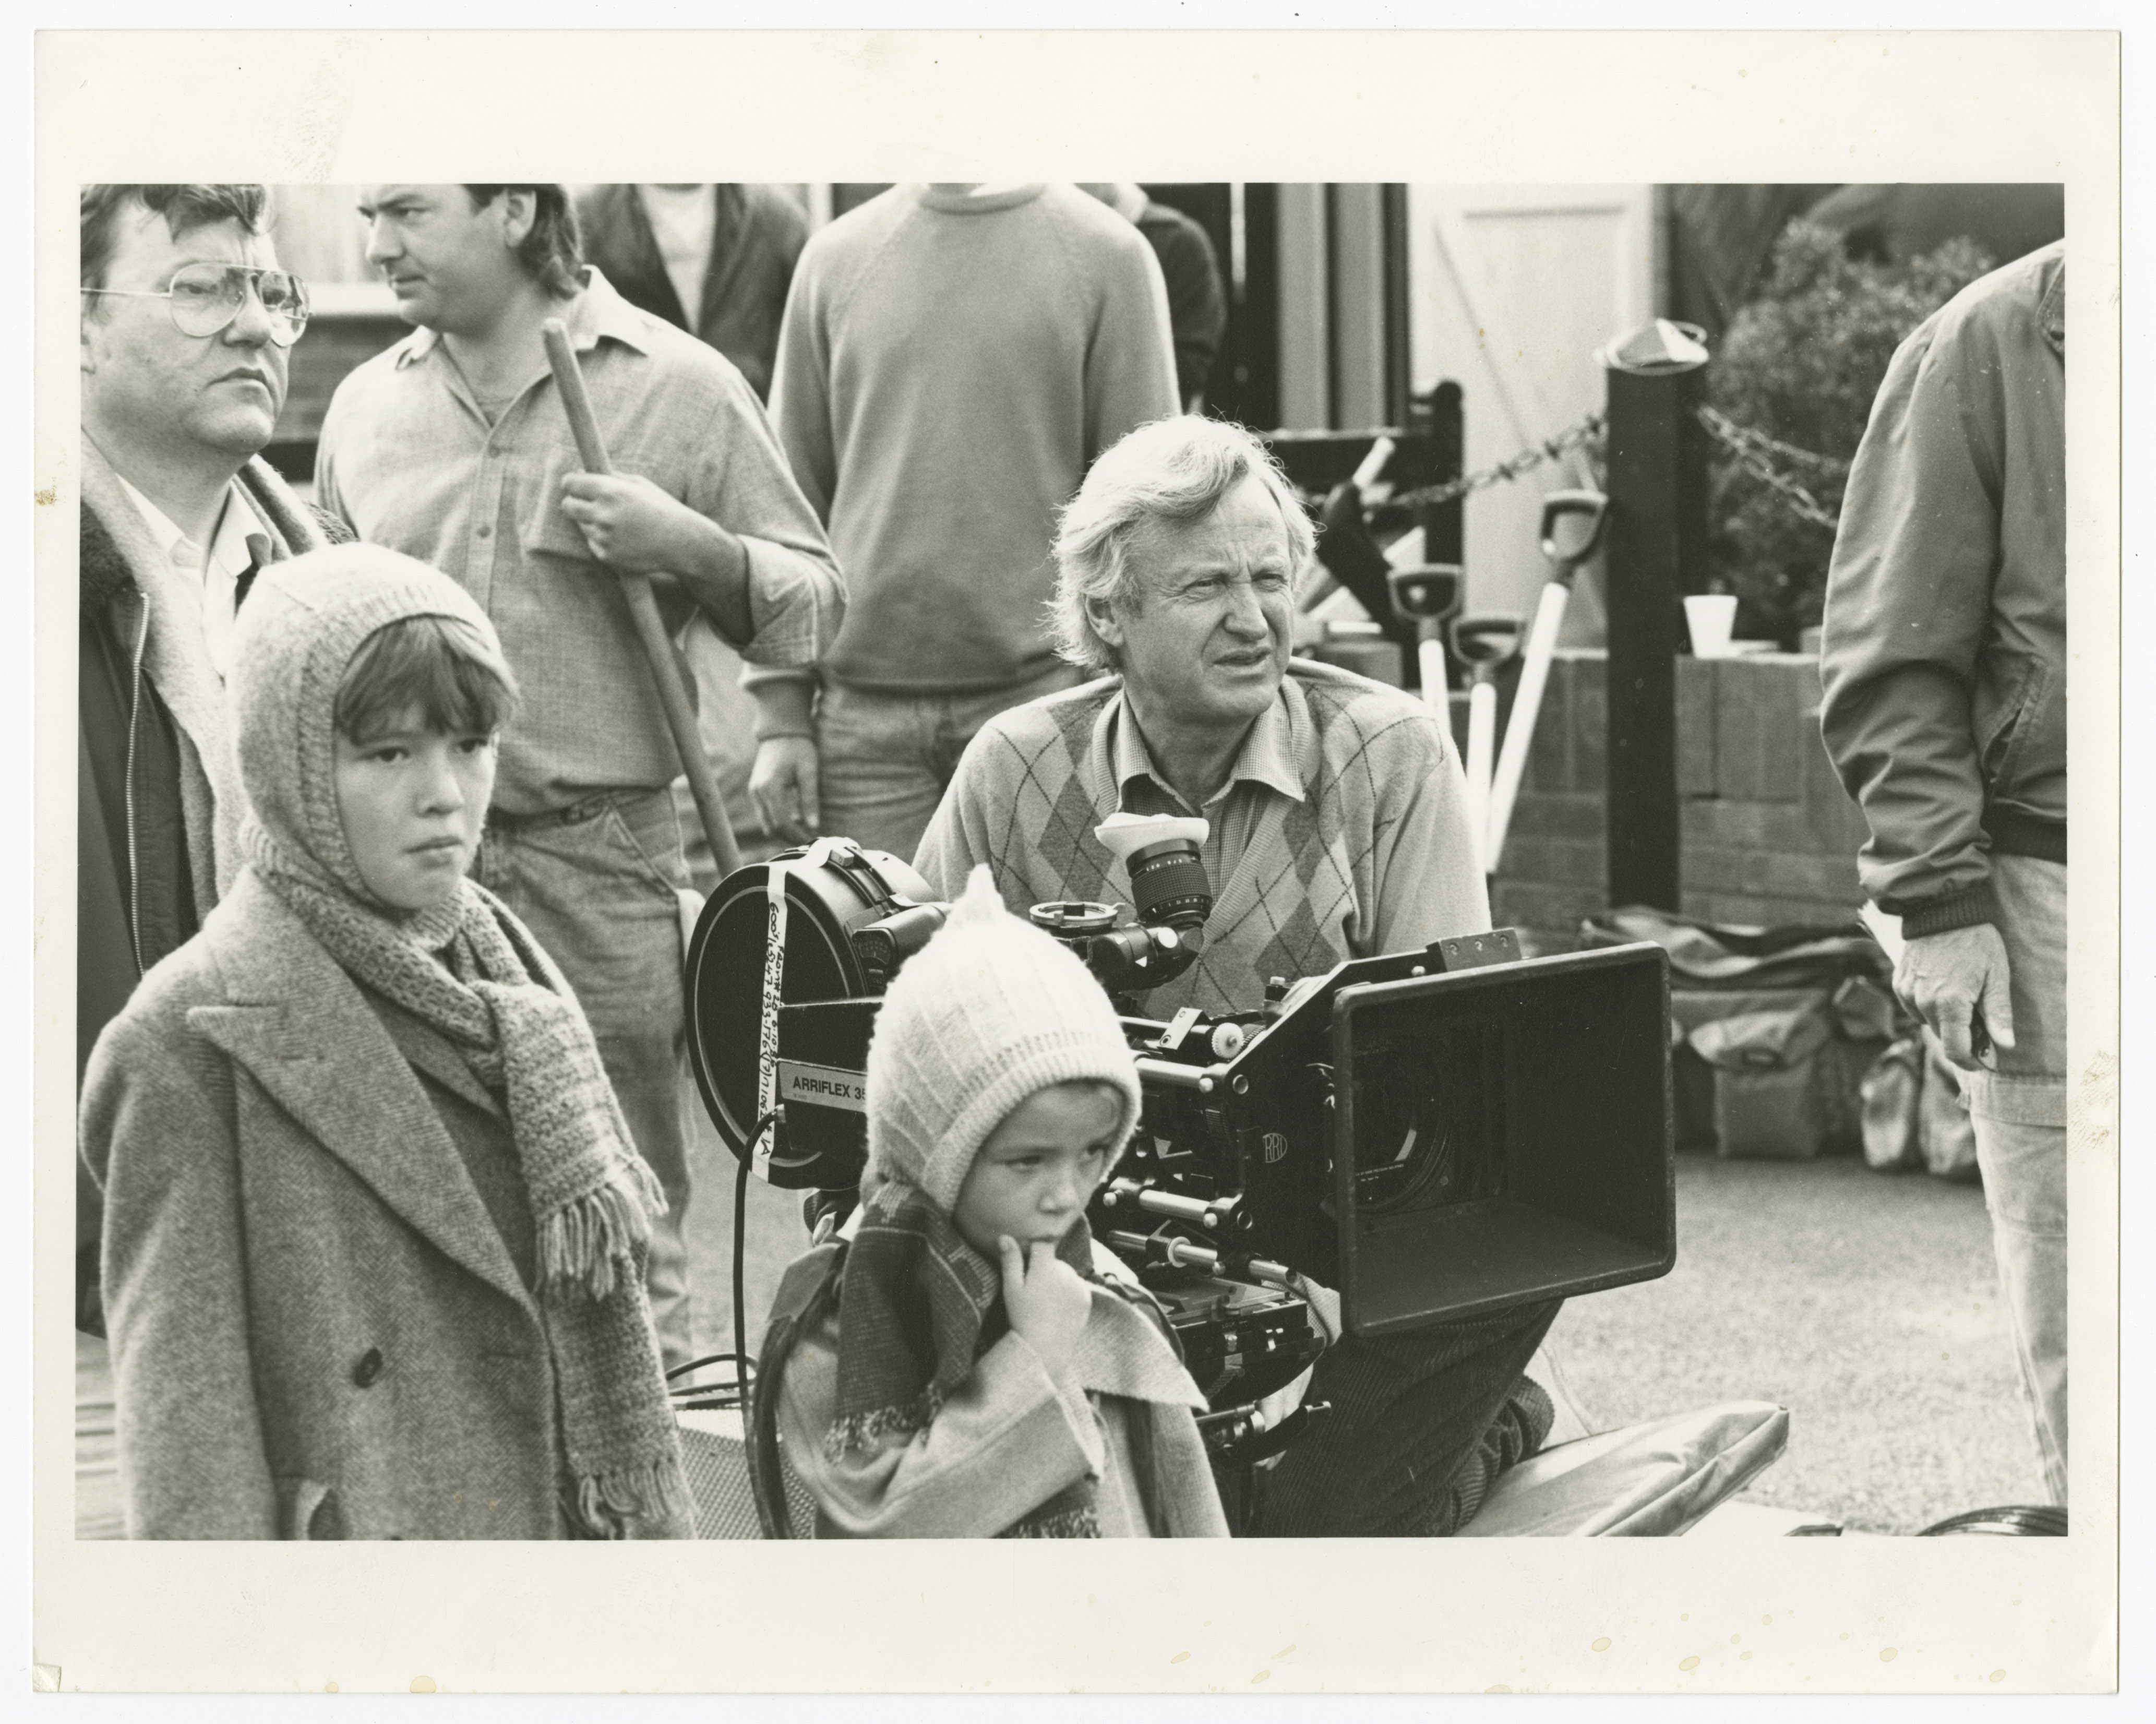 John Boorman behind the camera with child actors on the set of Hope and Glory